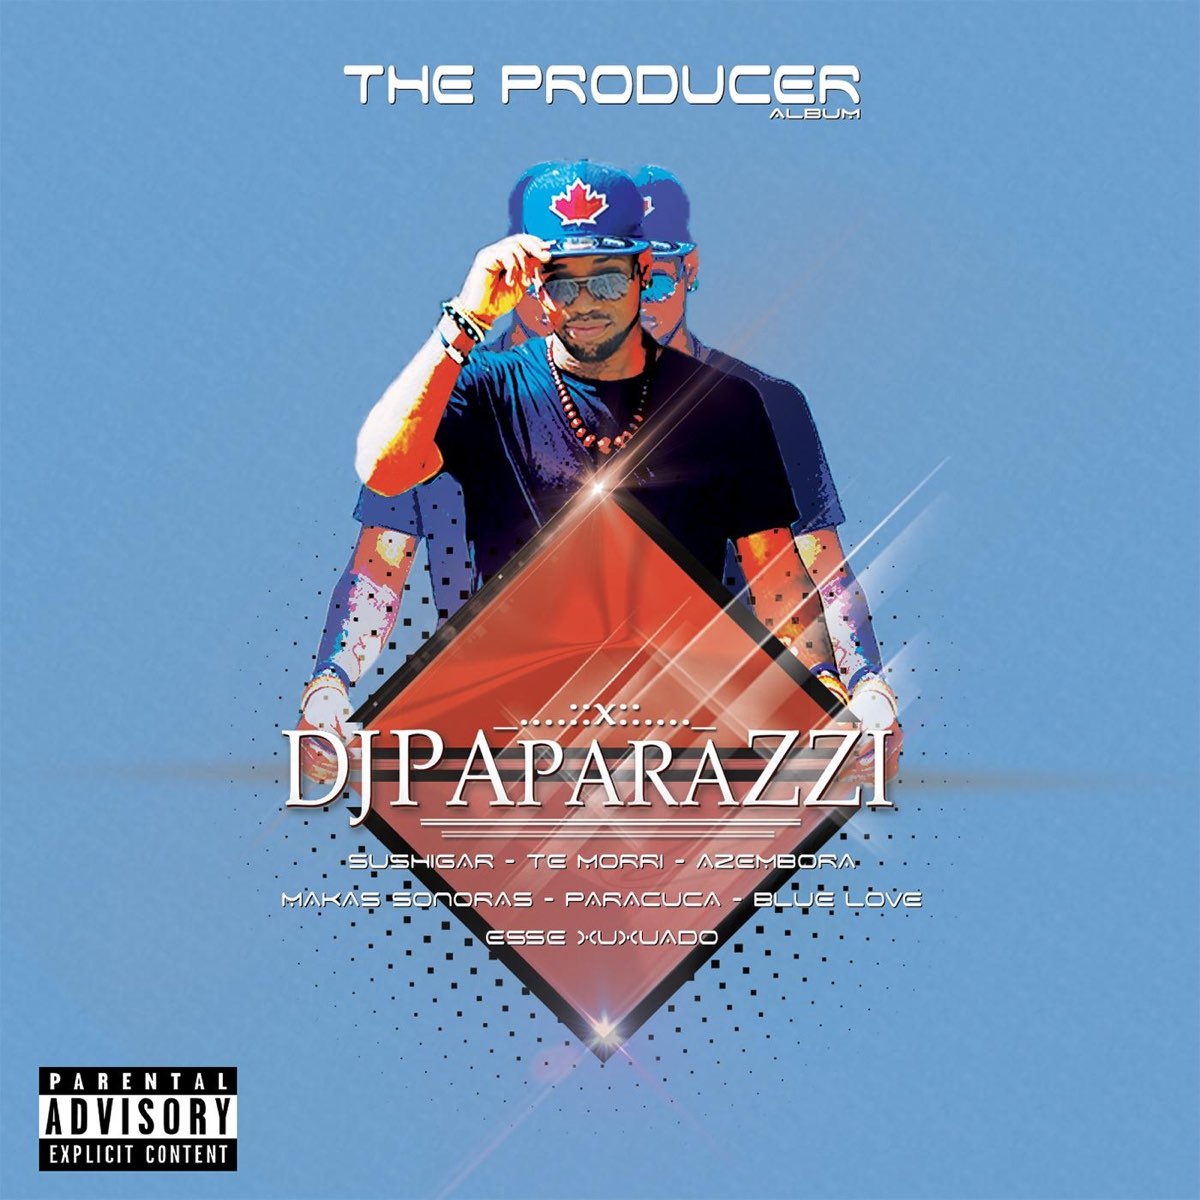 The Producer Album by DJ Paparazzi on Apple Music